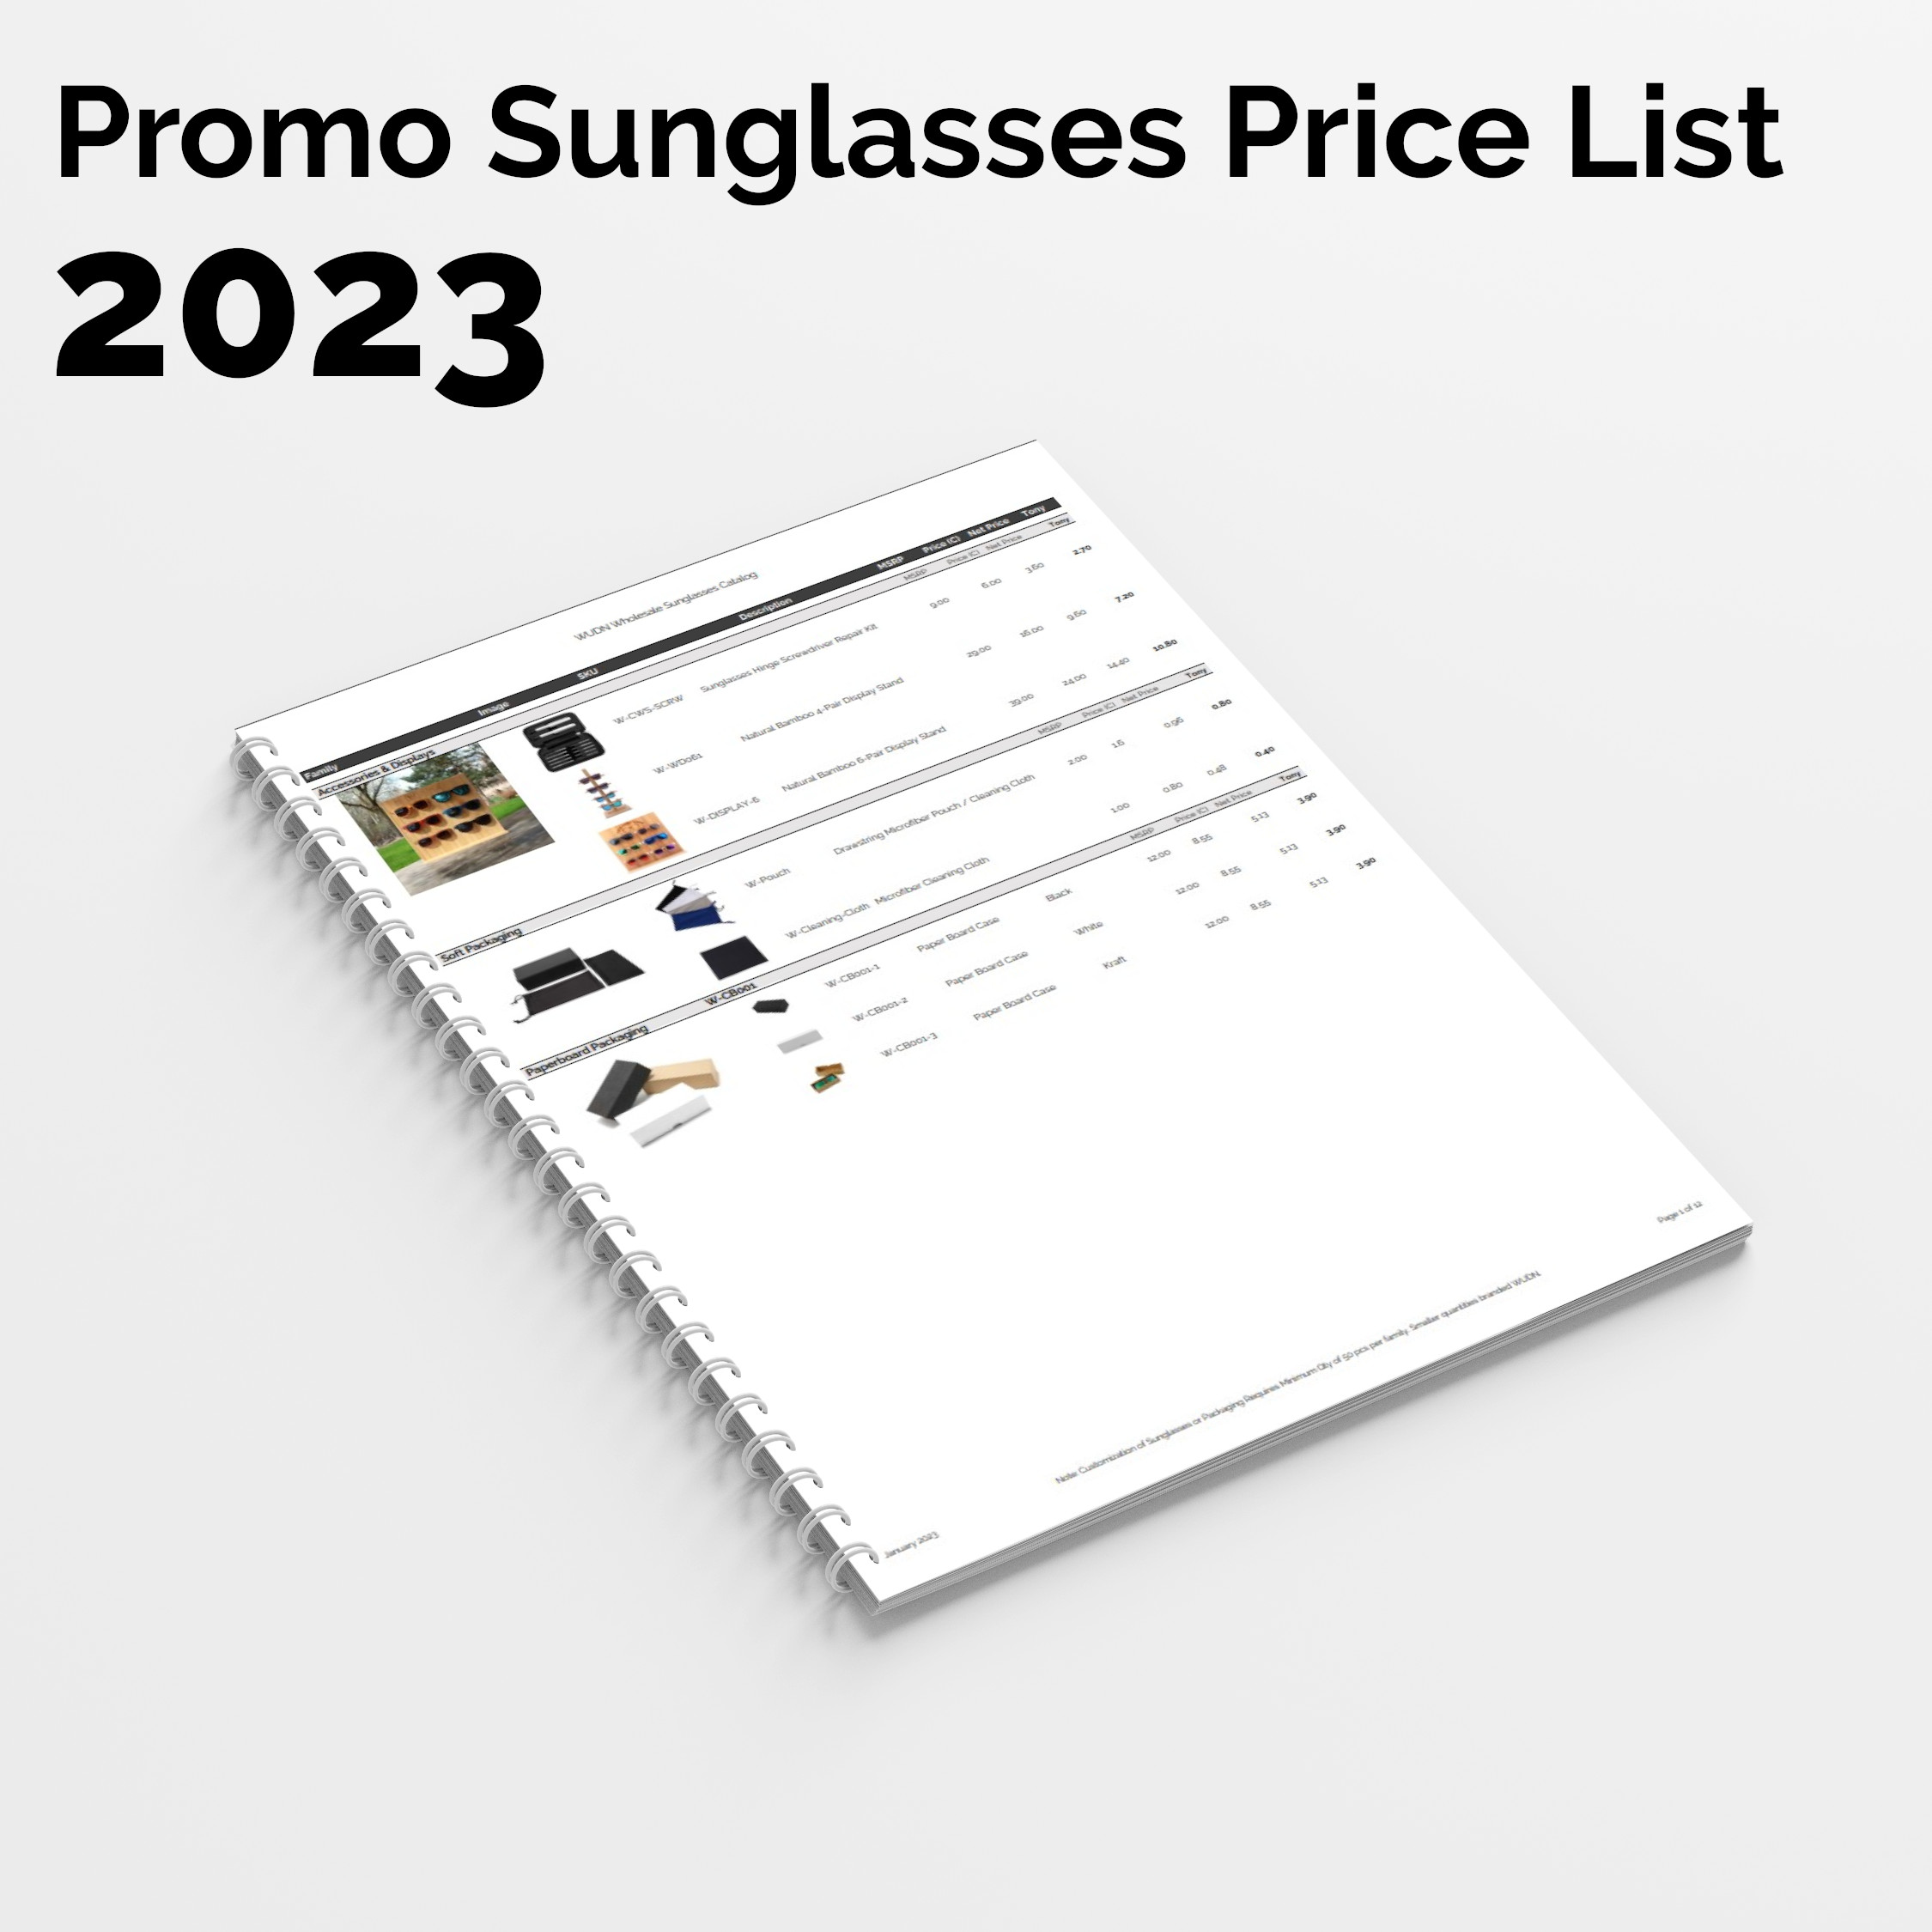 2023 promotional wooden sunglasses price list